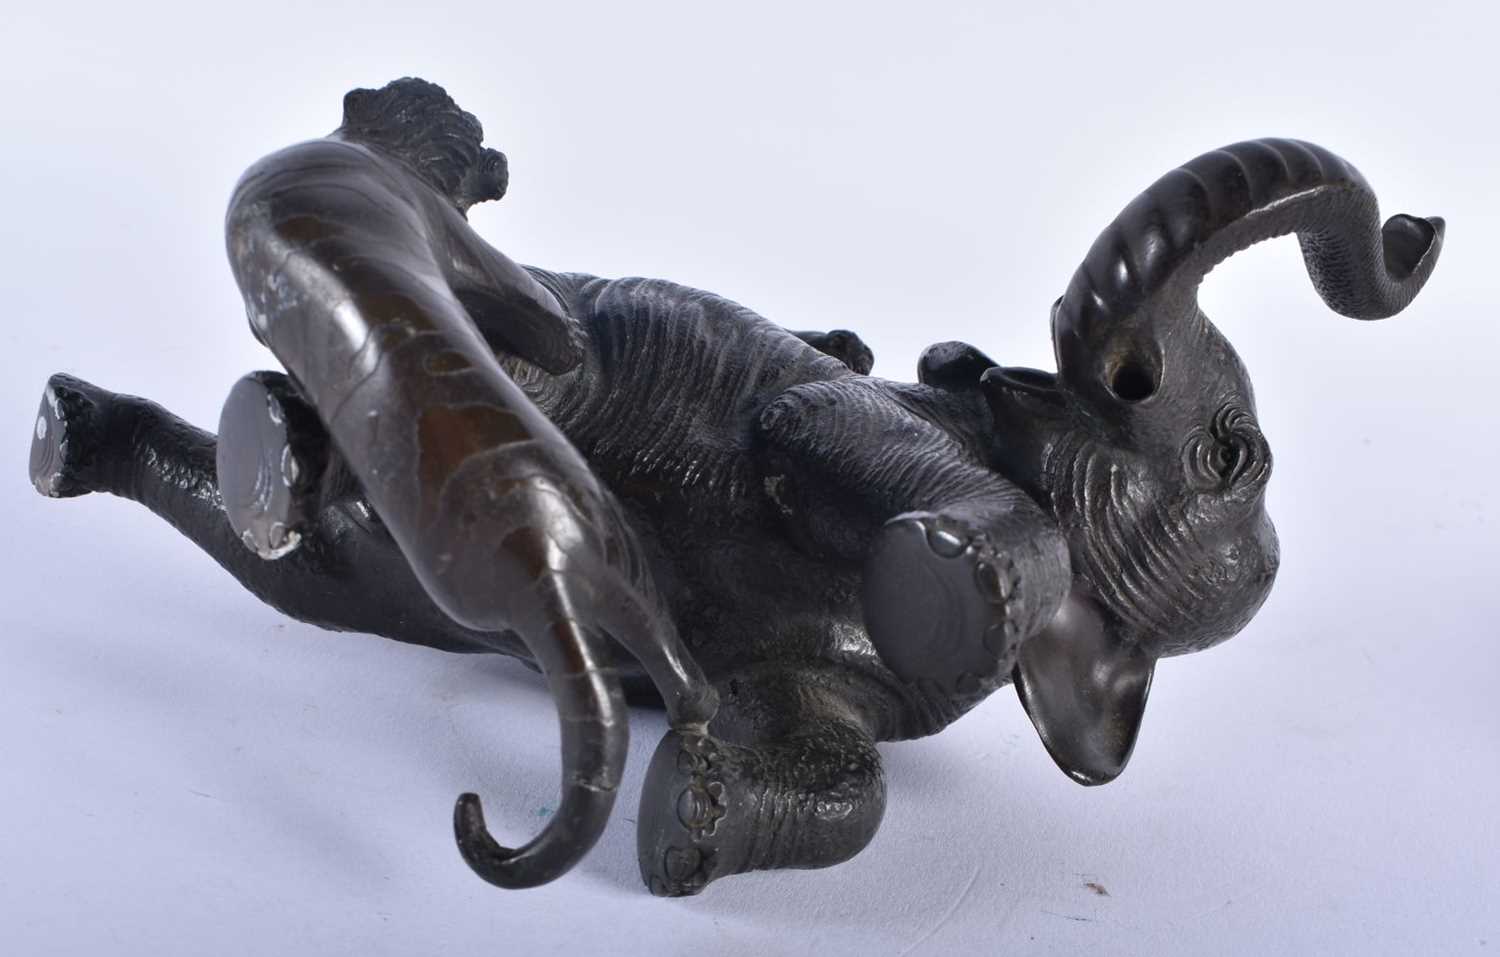 A 19TH CENTURY JAPANESE MEIJI PERIOD BRONZE OKIMONO modelled as an elephant being attacked by - Image 8 of 8